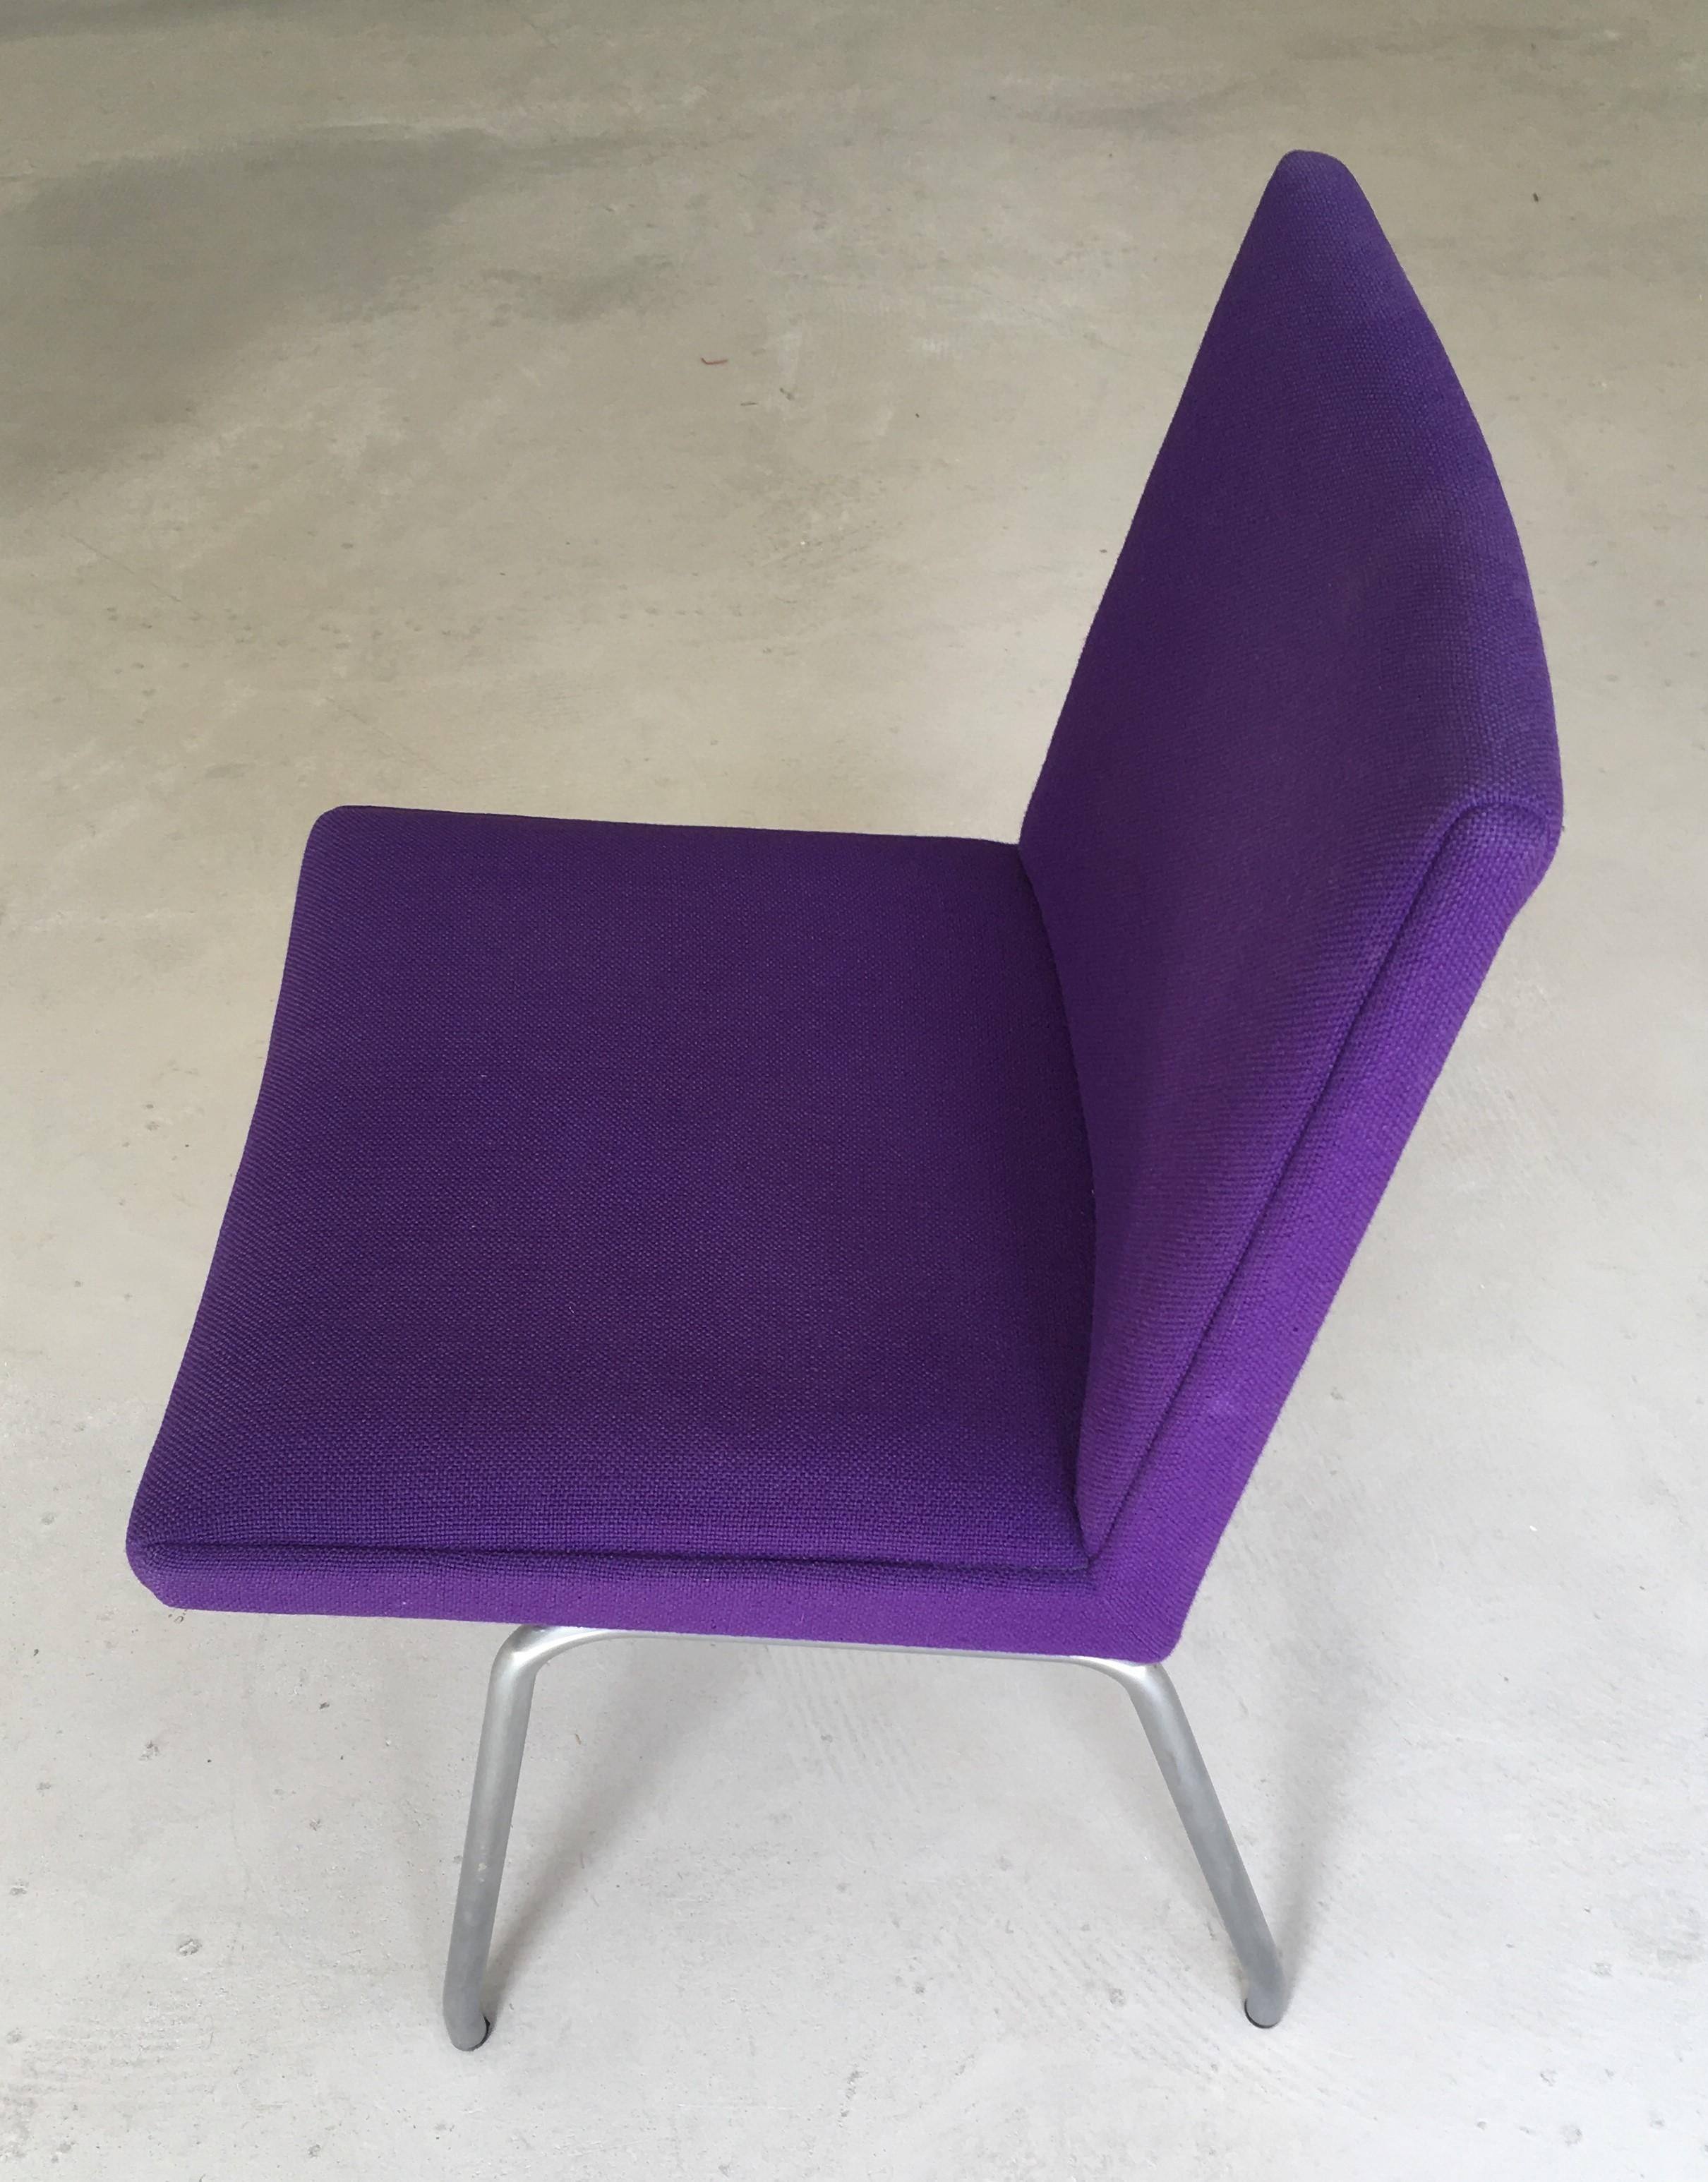 1960s Danish Hans J. Wegner Airport Chair, Reupholstered in Purple Fabric In Good Condition For Sale In Knebel, DK